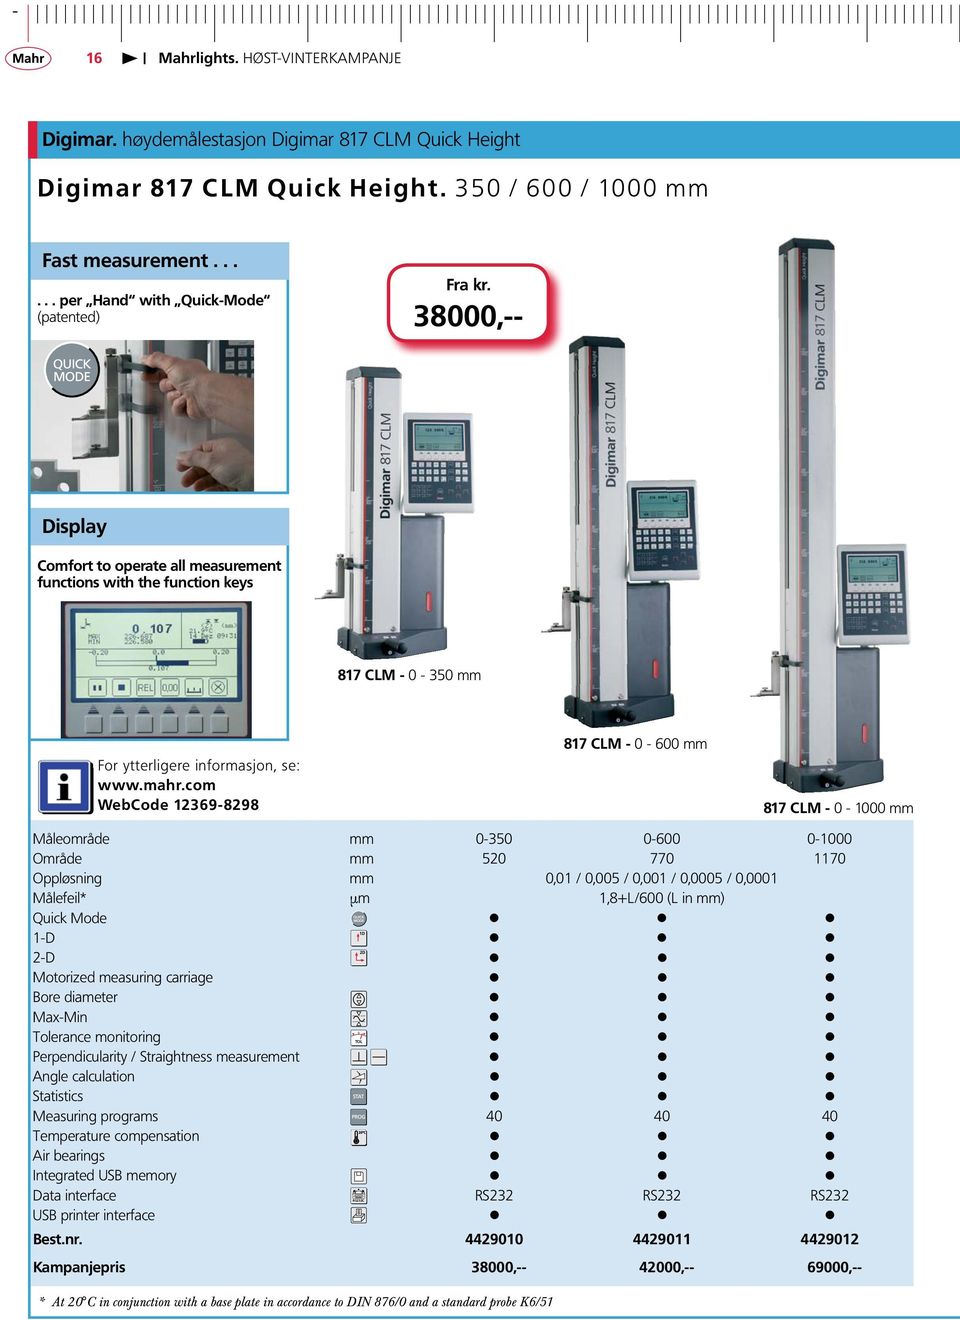 Område Oppløsning Målefeil* Quick Mode 1-D 2-D Motorized measuring carriage Bore diameter Max-Min Tolerance monitoring Perpendicularity / Straightness measurement Angle calculation Statistics